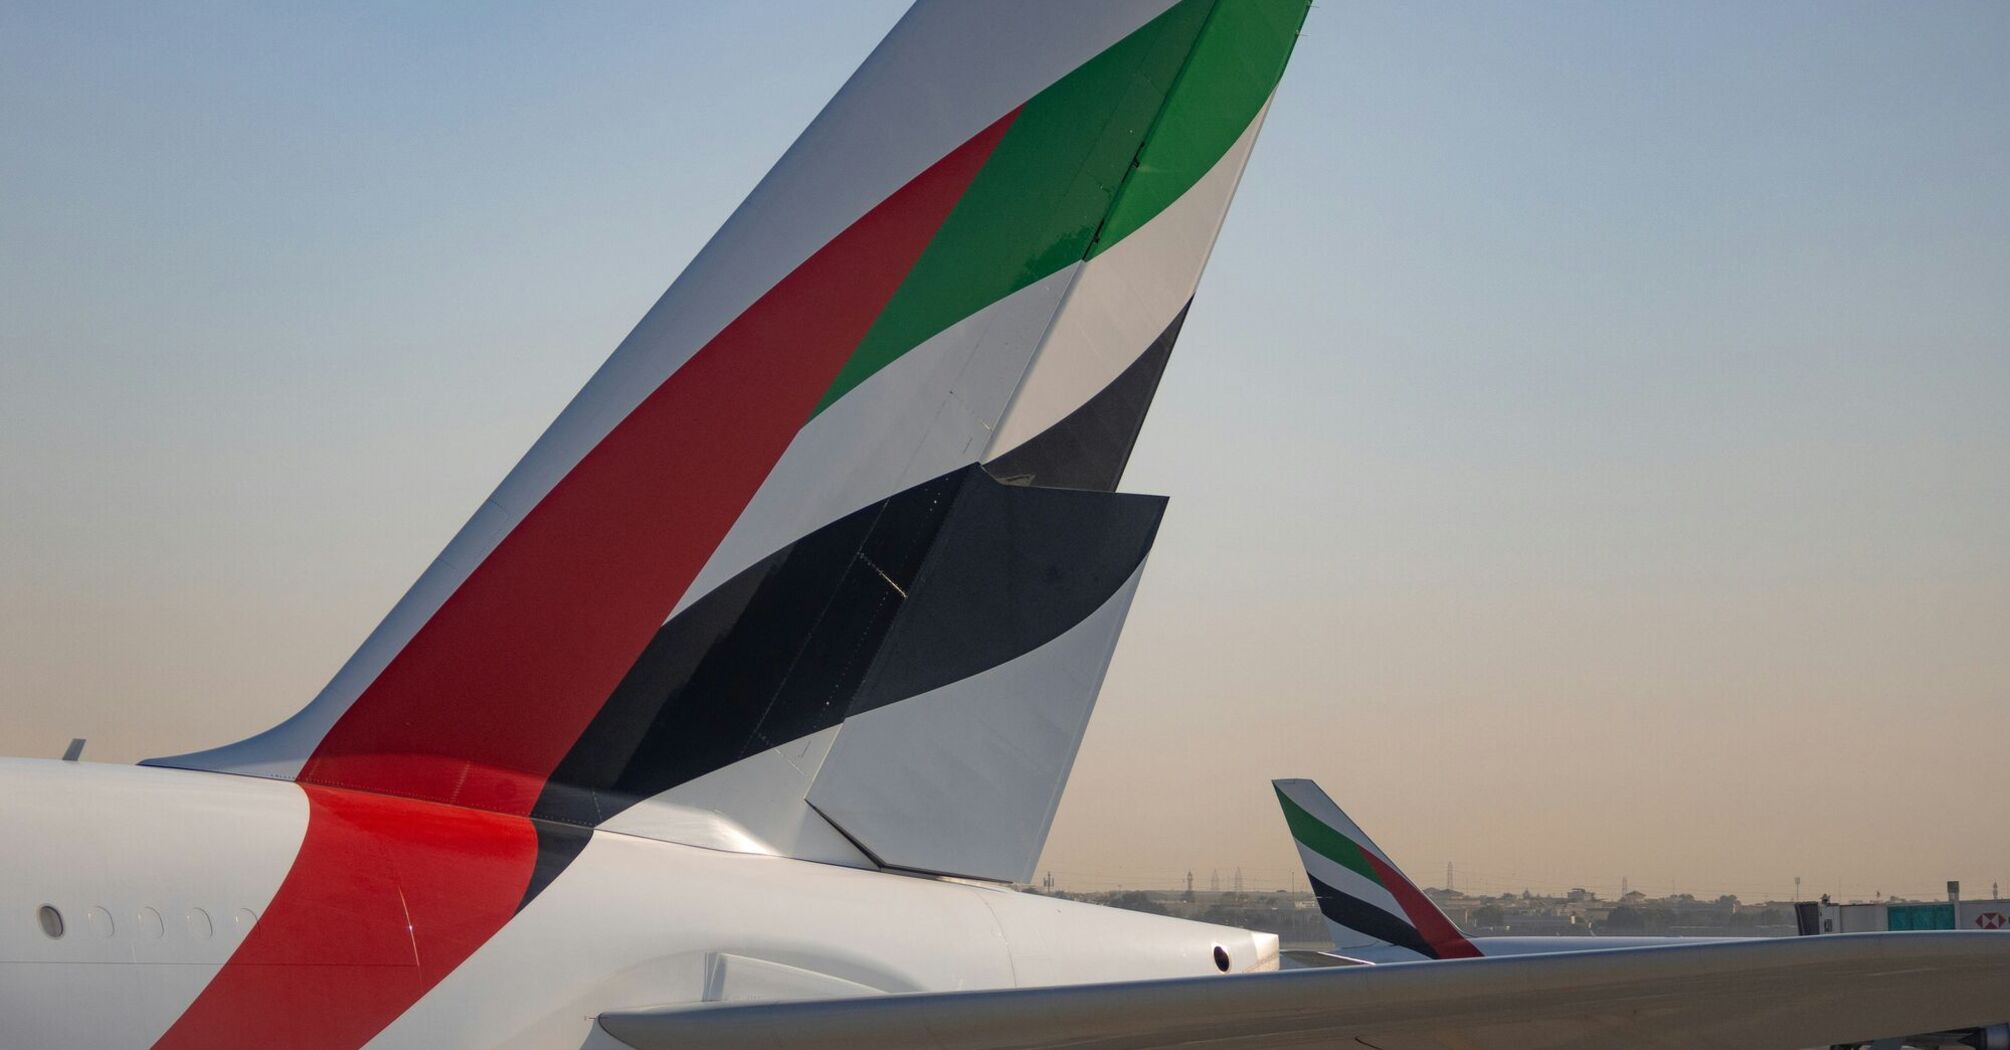 Emirates Airline tail fin at an airport during sunrise